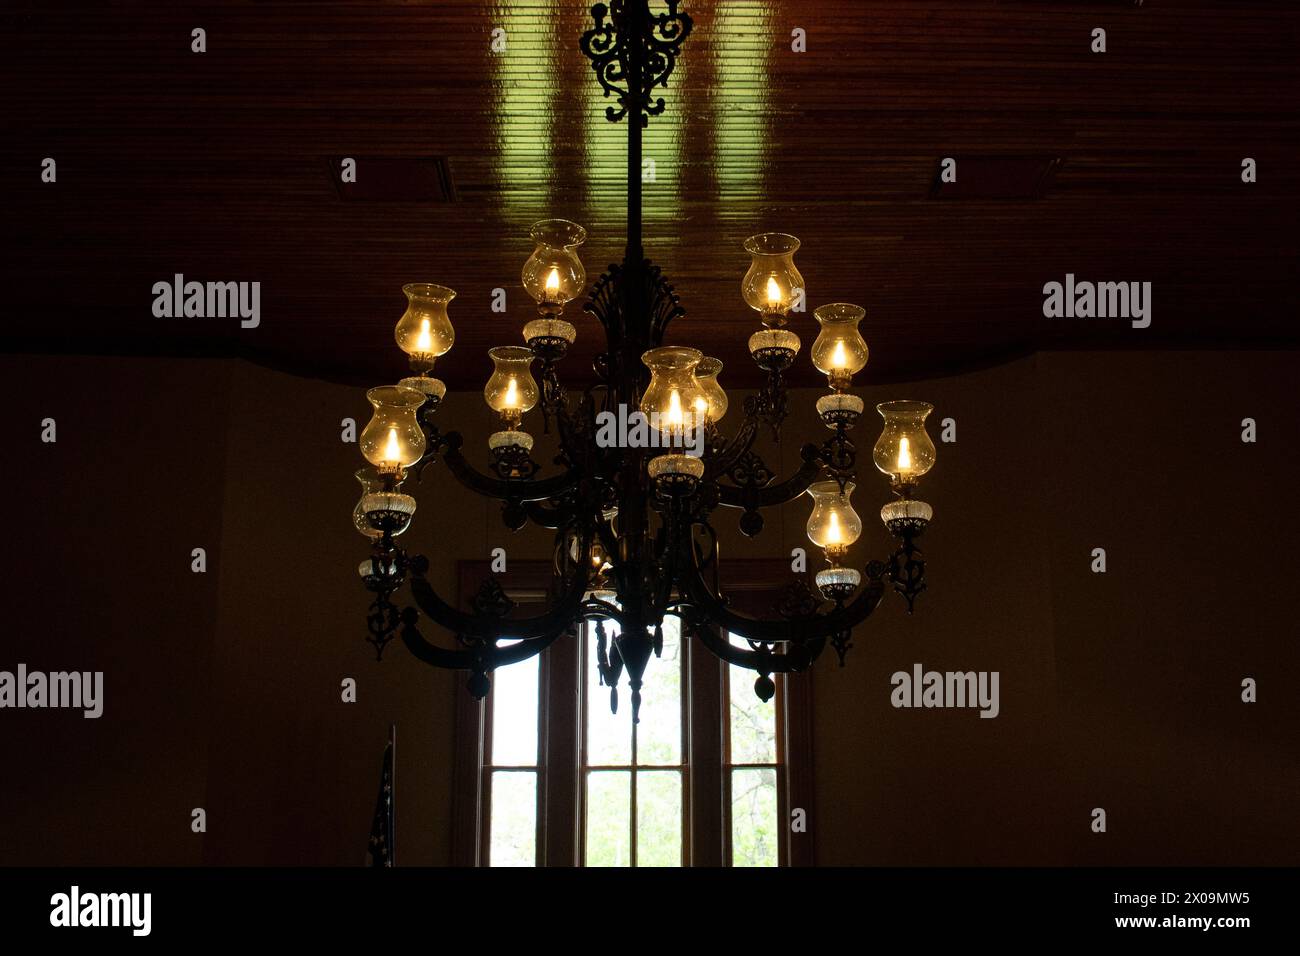 Antique chandelier of 1800's courthouse Stock Photo